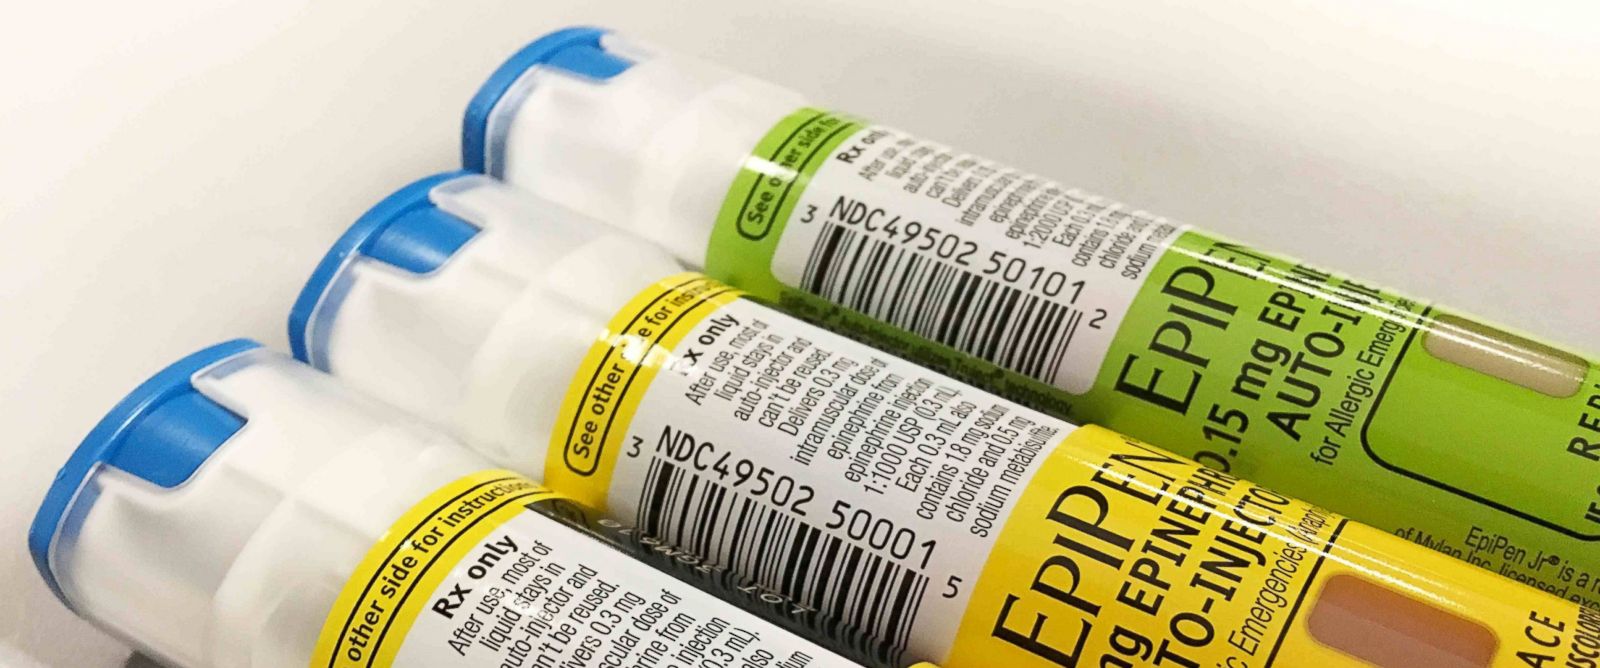 Mylan  Is Hit With A Racketeering Lawsuit Over EpiPen Price Increase